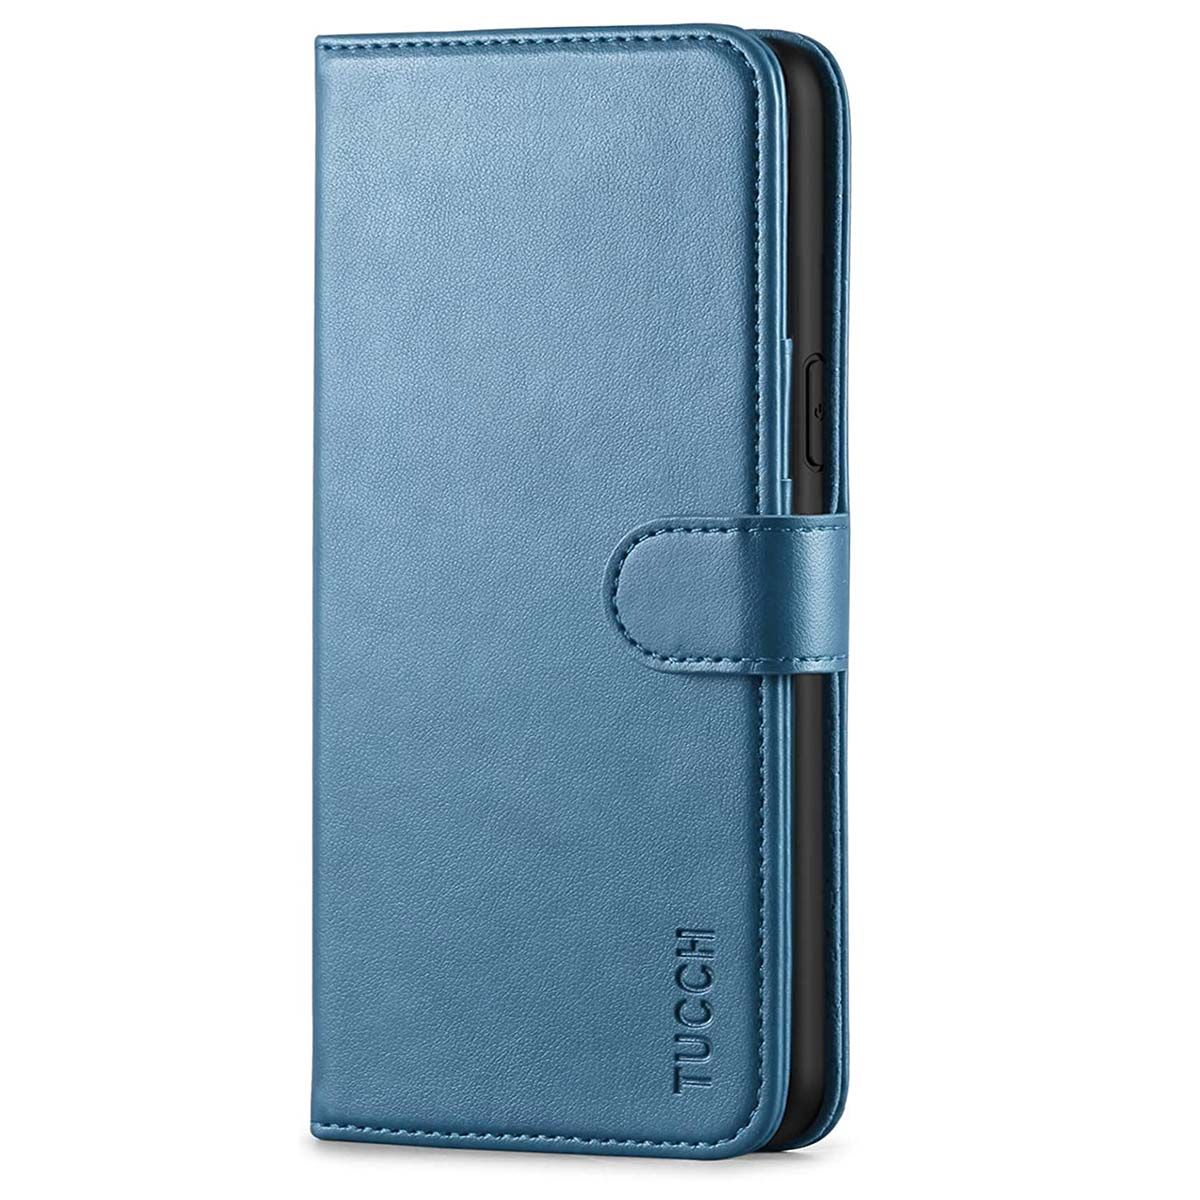 sagtmodighed Passiv Luminans TUCCH iPhone XS Wallet Case, iPhone XS Leather Cover, Auto Sleep/Wake up,  Magnet Clasp, Stand - Lake Blue